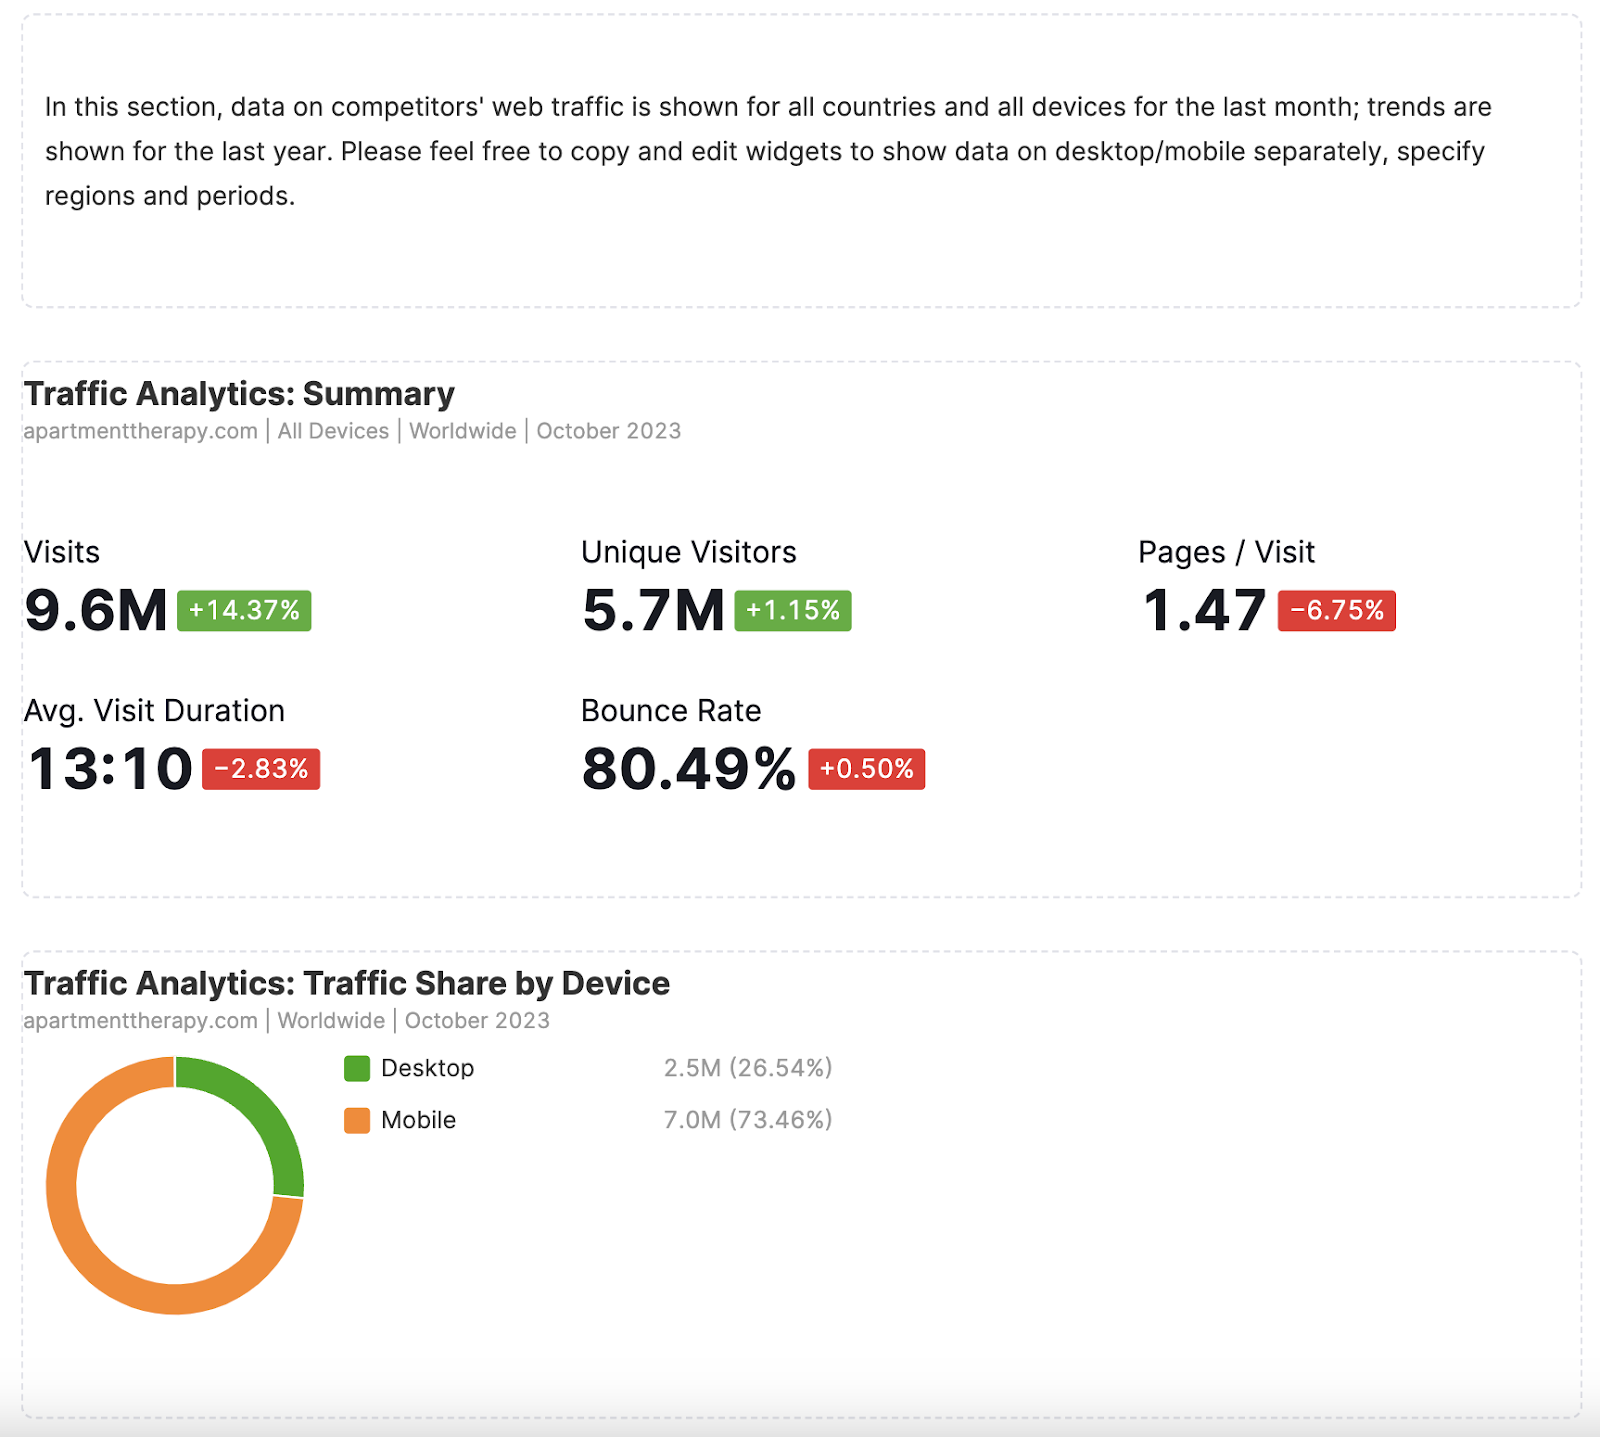 "Traffic Analytics: Summary" section of the report